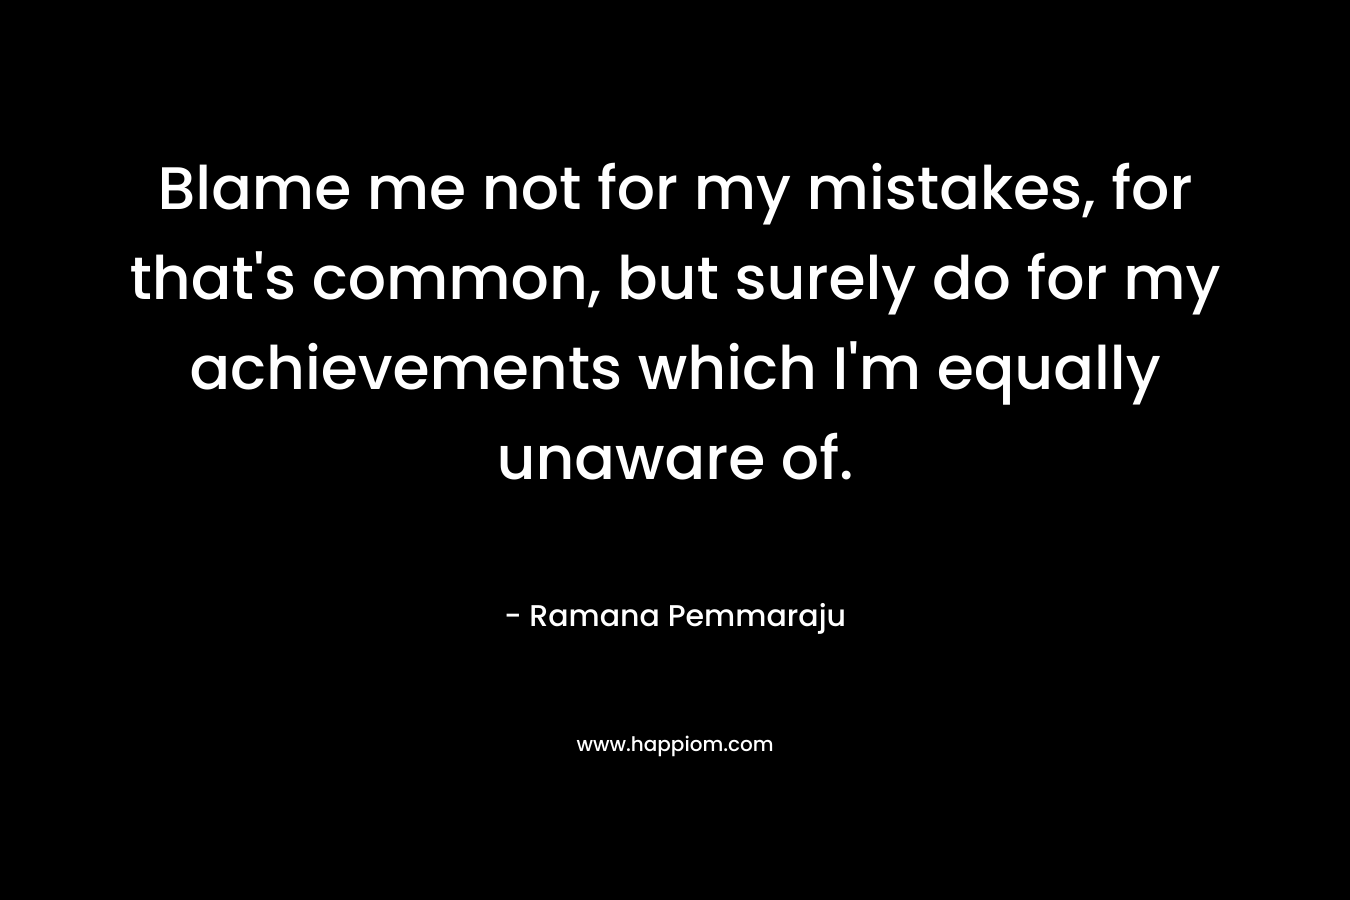 Blame me not for my mistakes, for that's common, but surely do for my achievements which I'm equally unaware of.